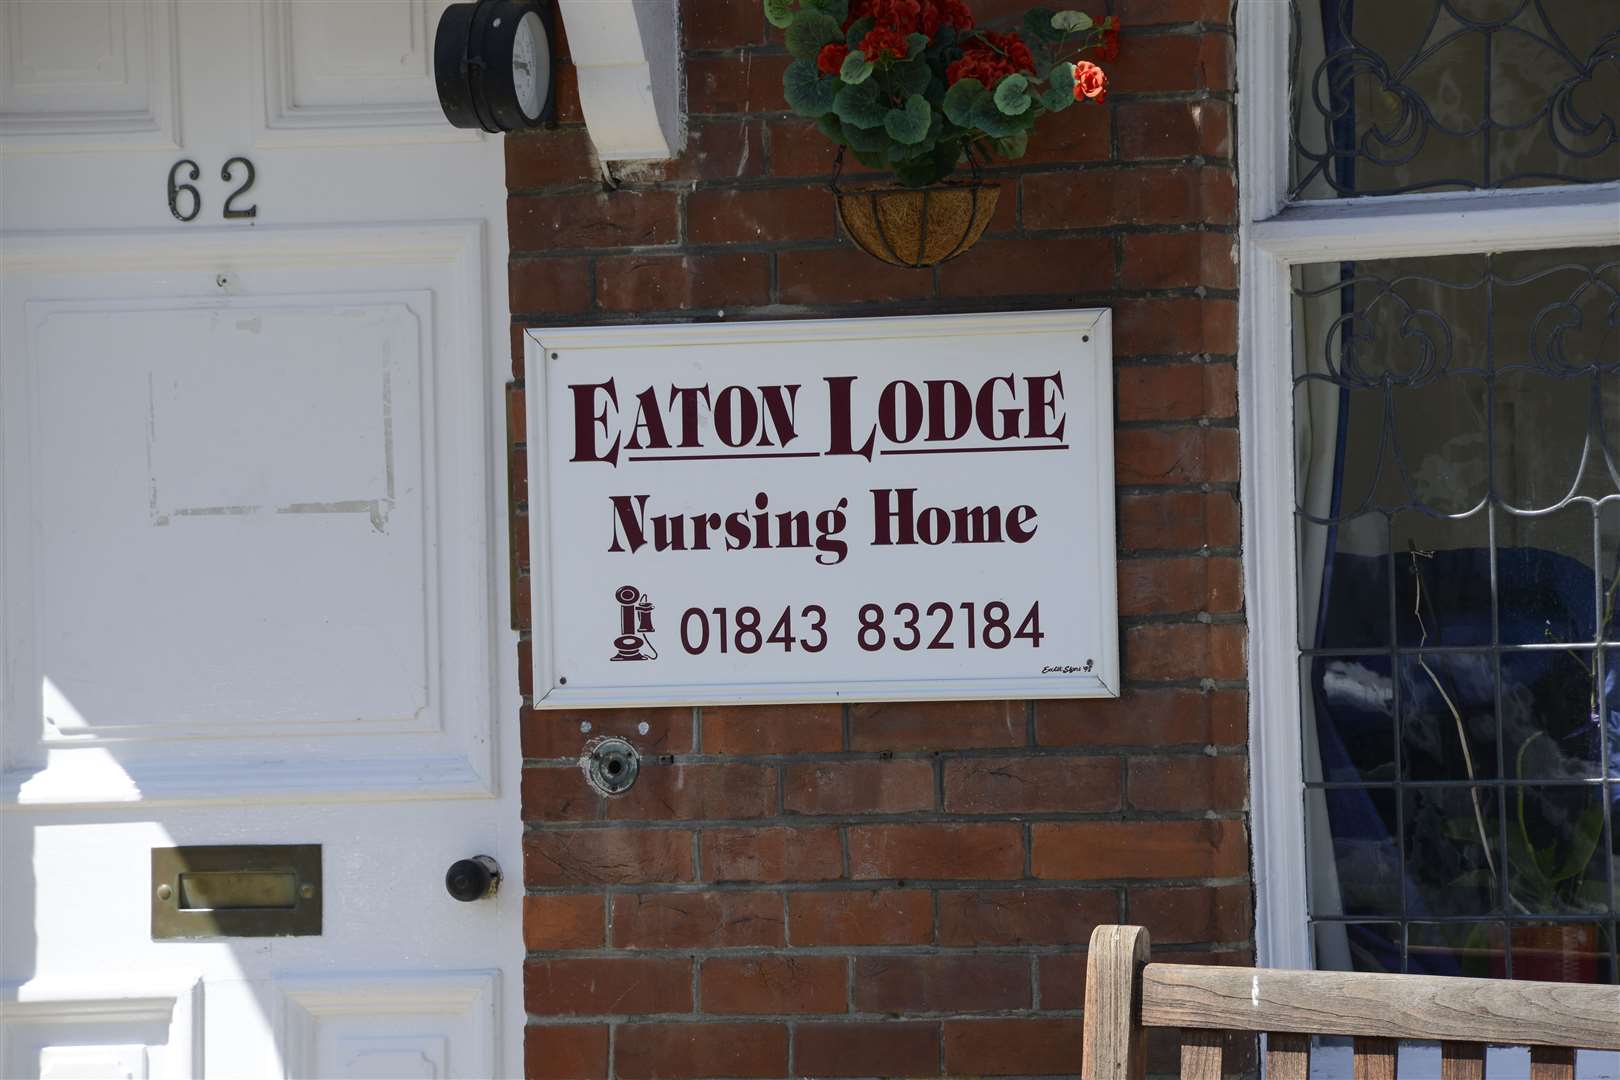 Maria Kallis, manager of Eaton Lodge Nursing Home, pictured, says the sector has been treated with a lack of respect. Picture: Paul Amos